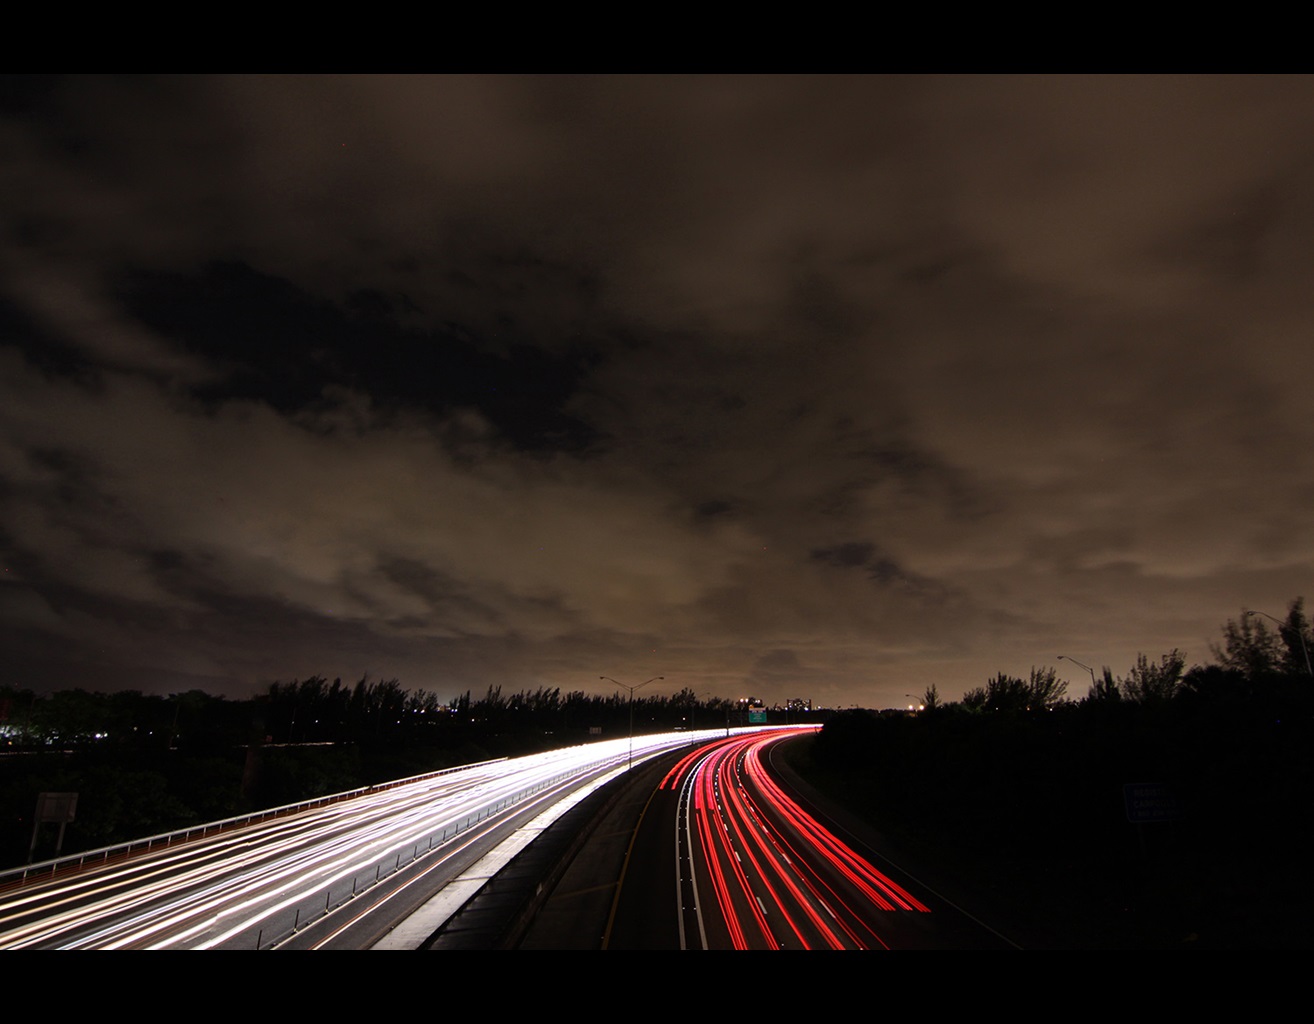 Light beams from cars on roadway under a cloudy night sky